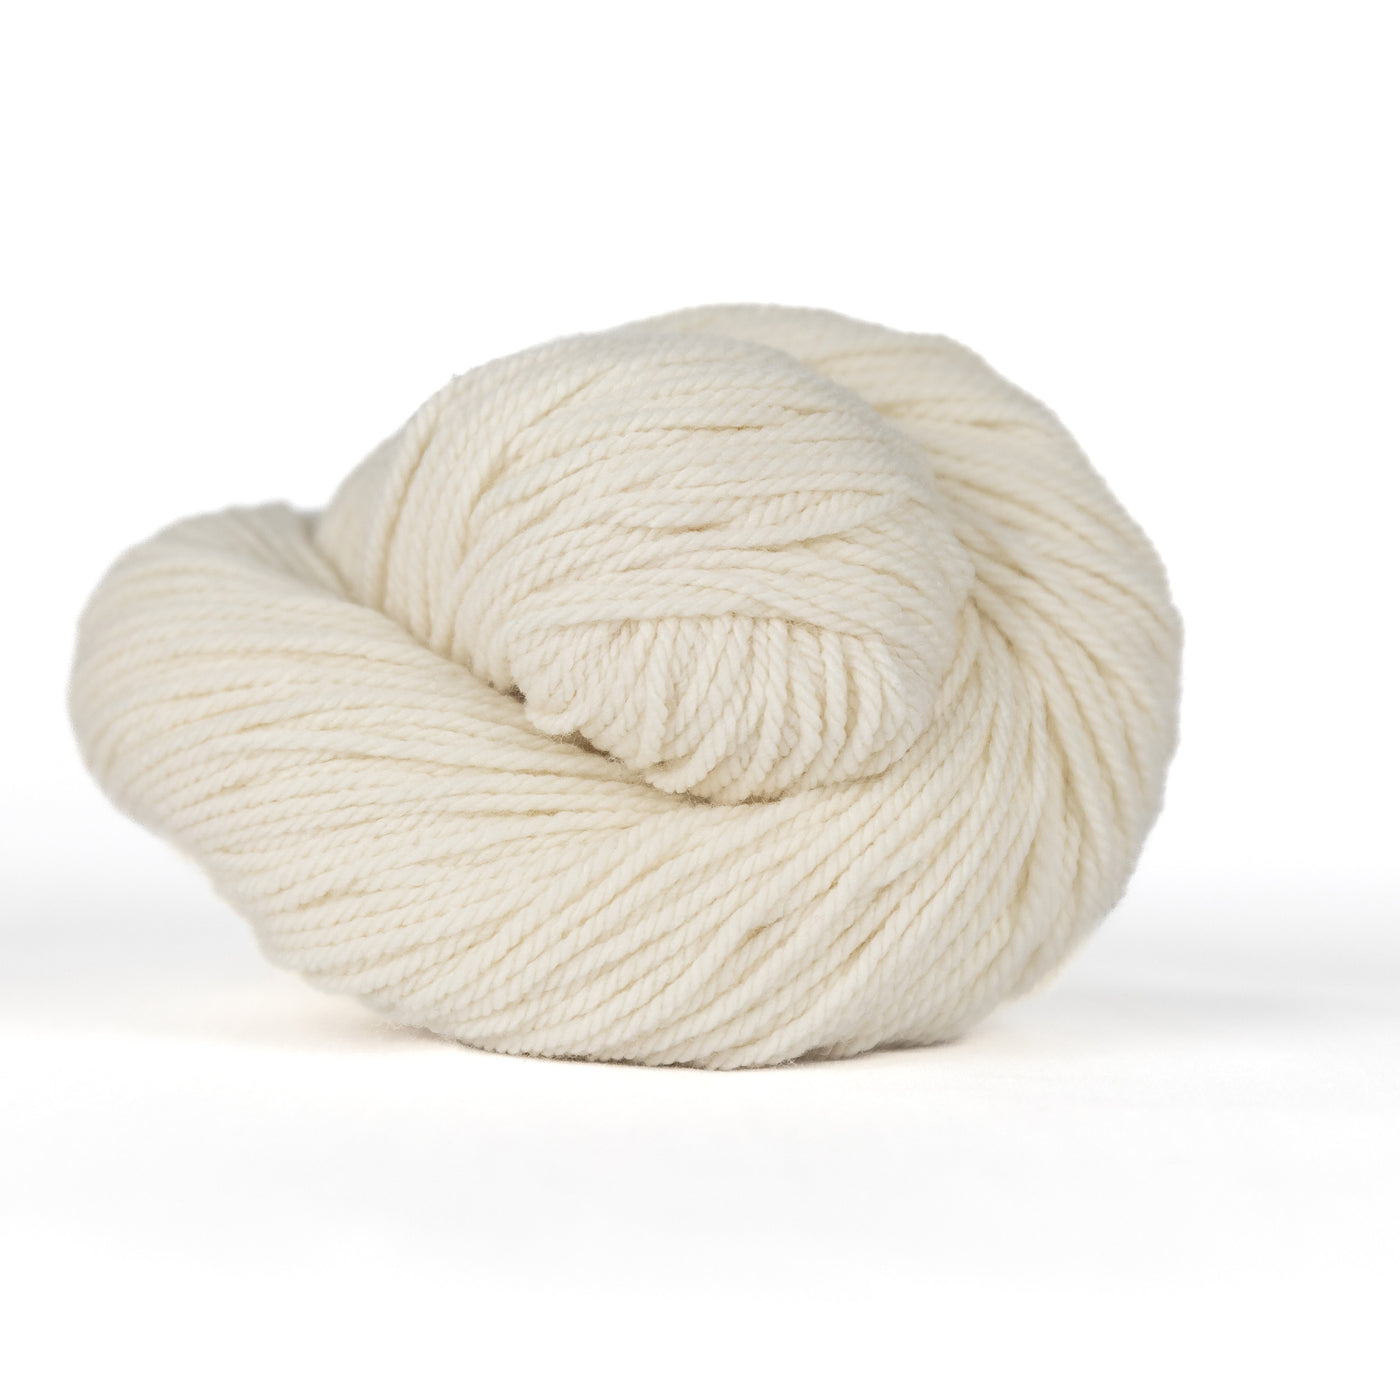 Cora 3ply Worsted Weight Yarn - Natural Cream